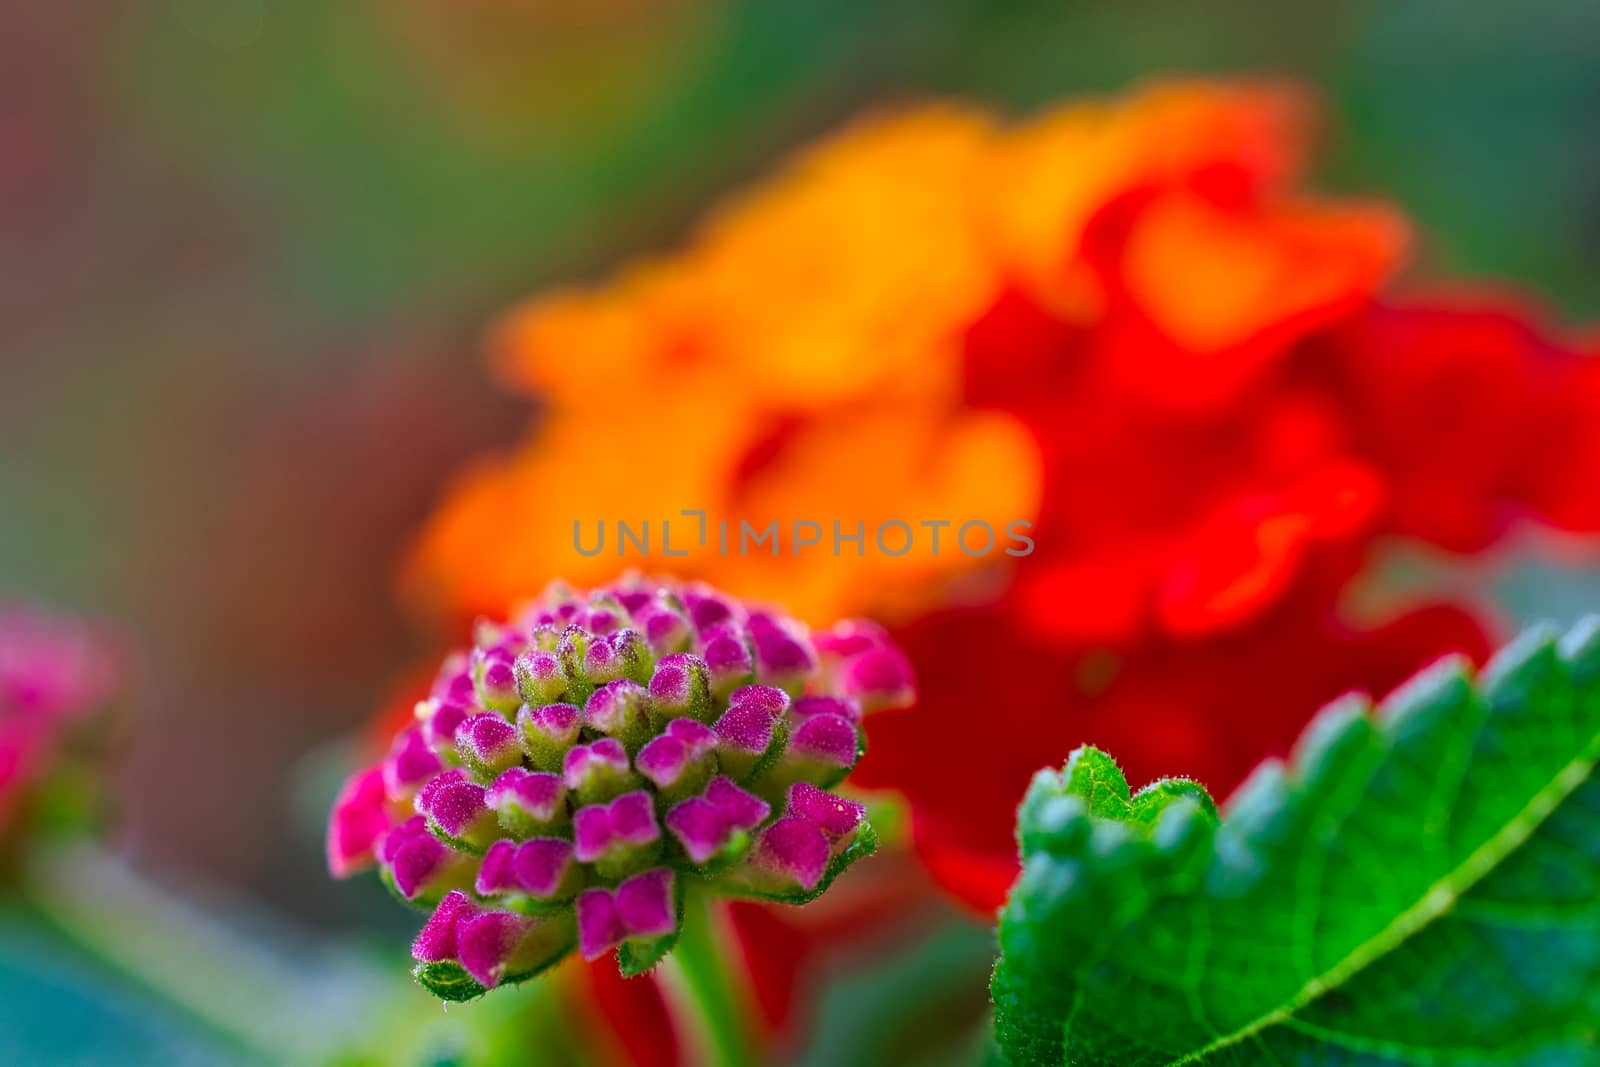 Colorful close-up photo of blooming flowers. Pink, orange and red flowers